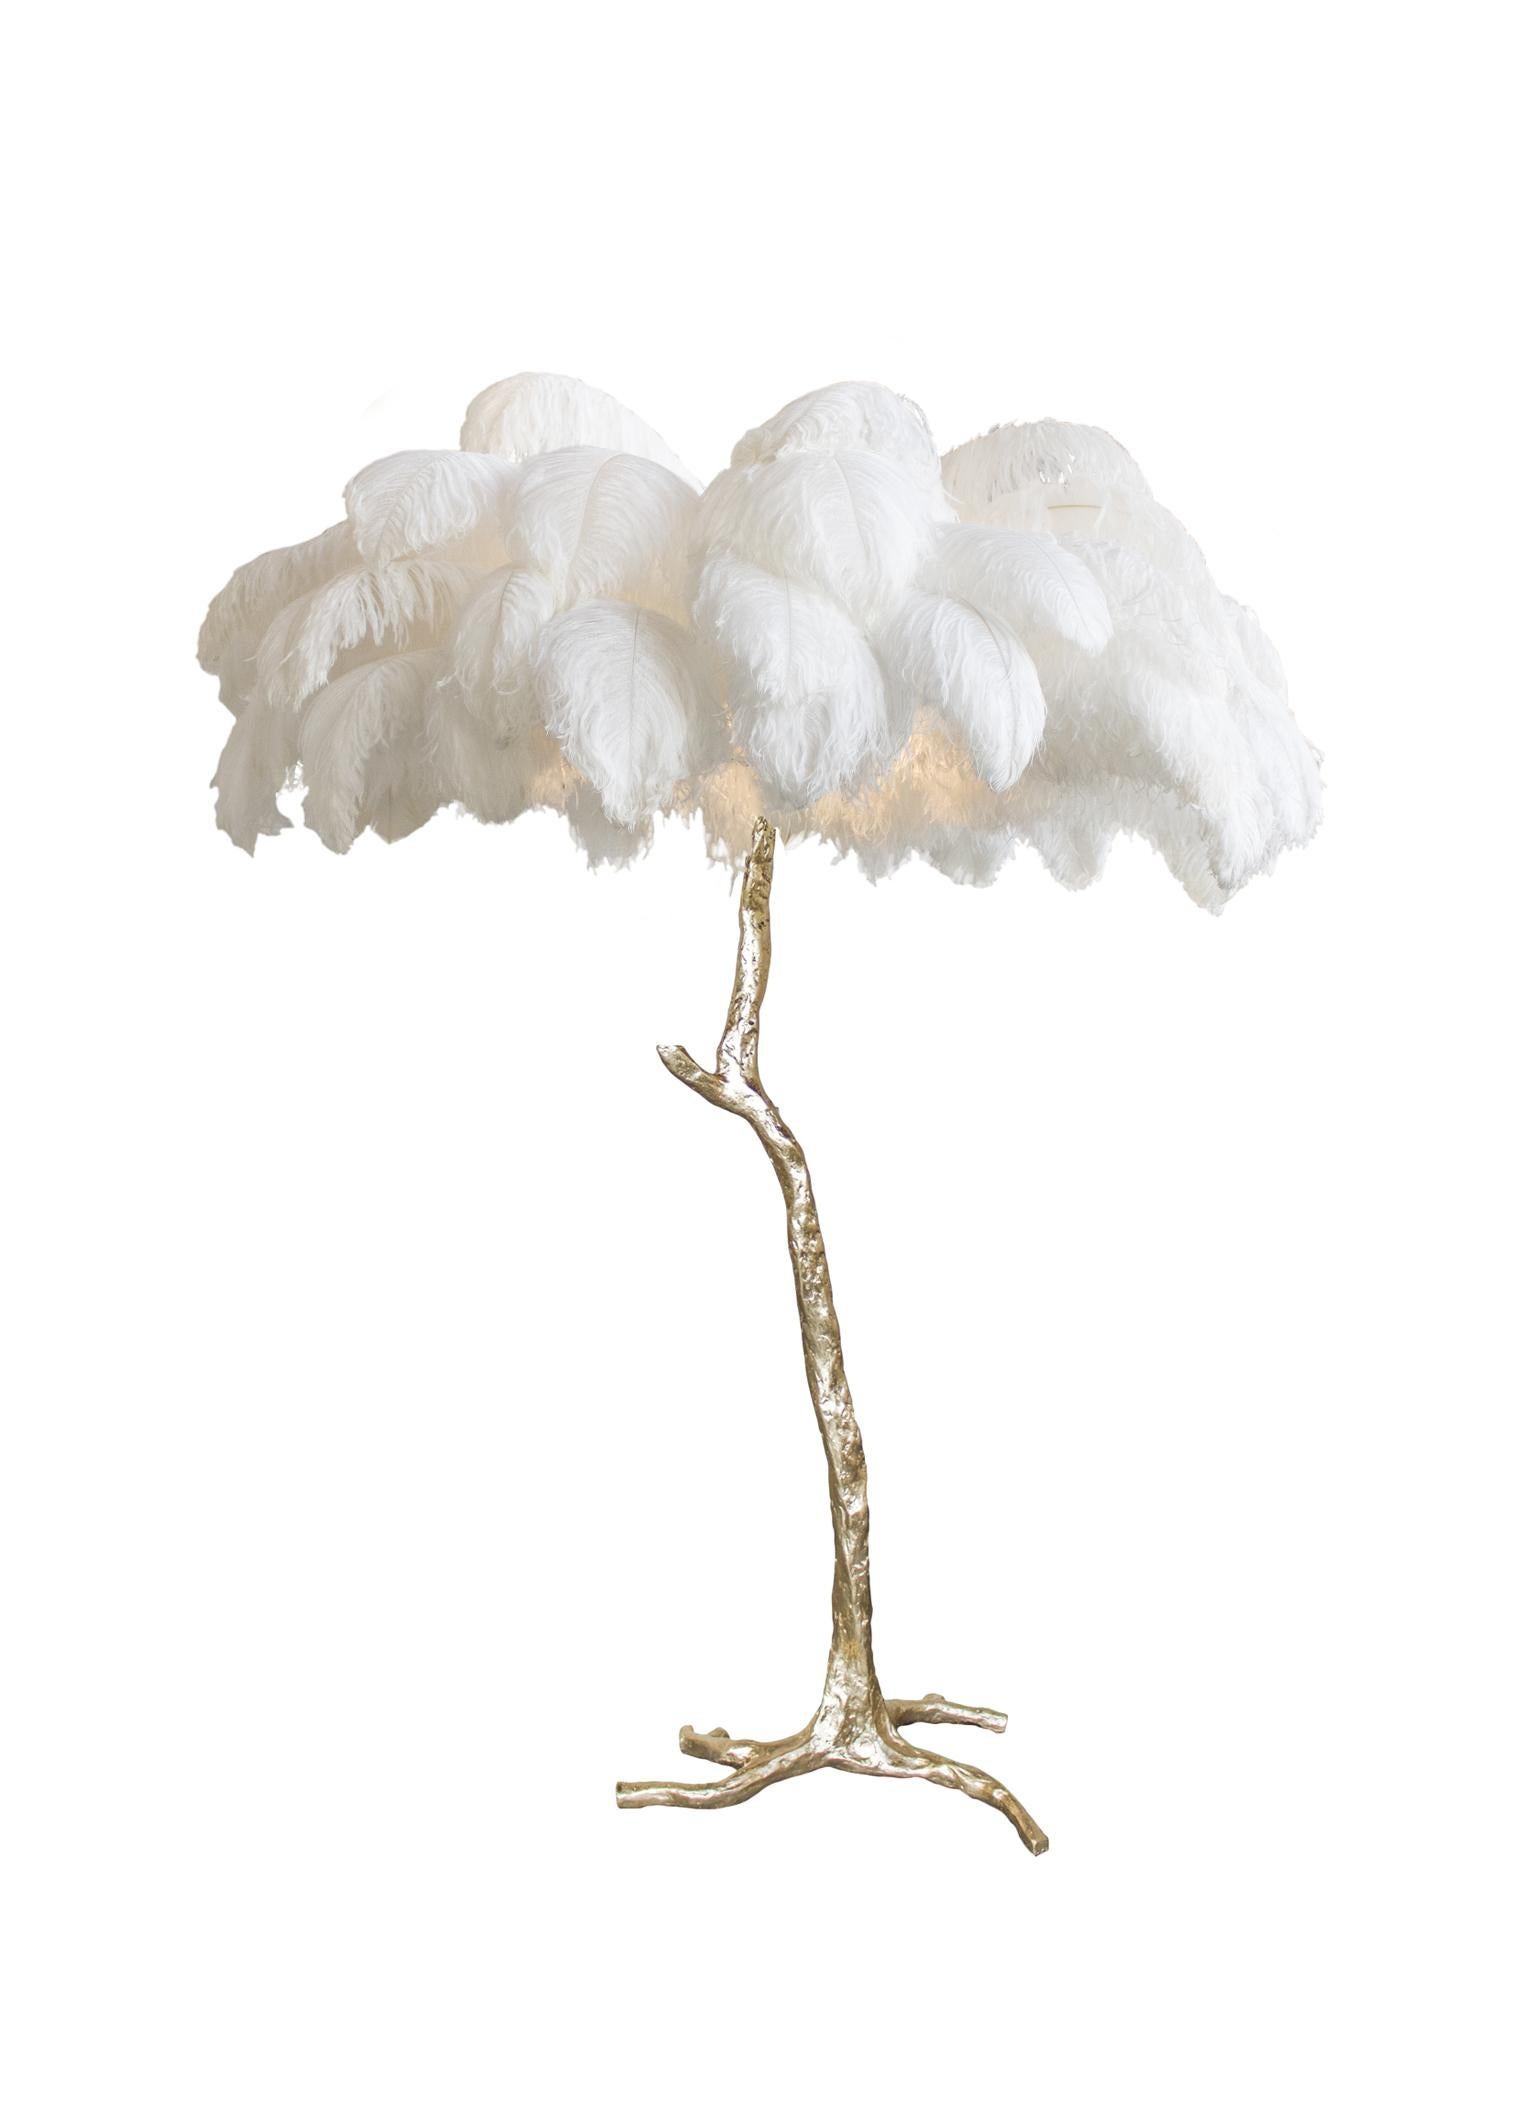 The ostrich feather lamp, edition piece by a modern Grand Tour.

An illuminating palm tree, resplendent with exquisite ostrich feather foliage, the feather lamp takes centre stage in any luxury setting and delivers the ultimate midas touch to